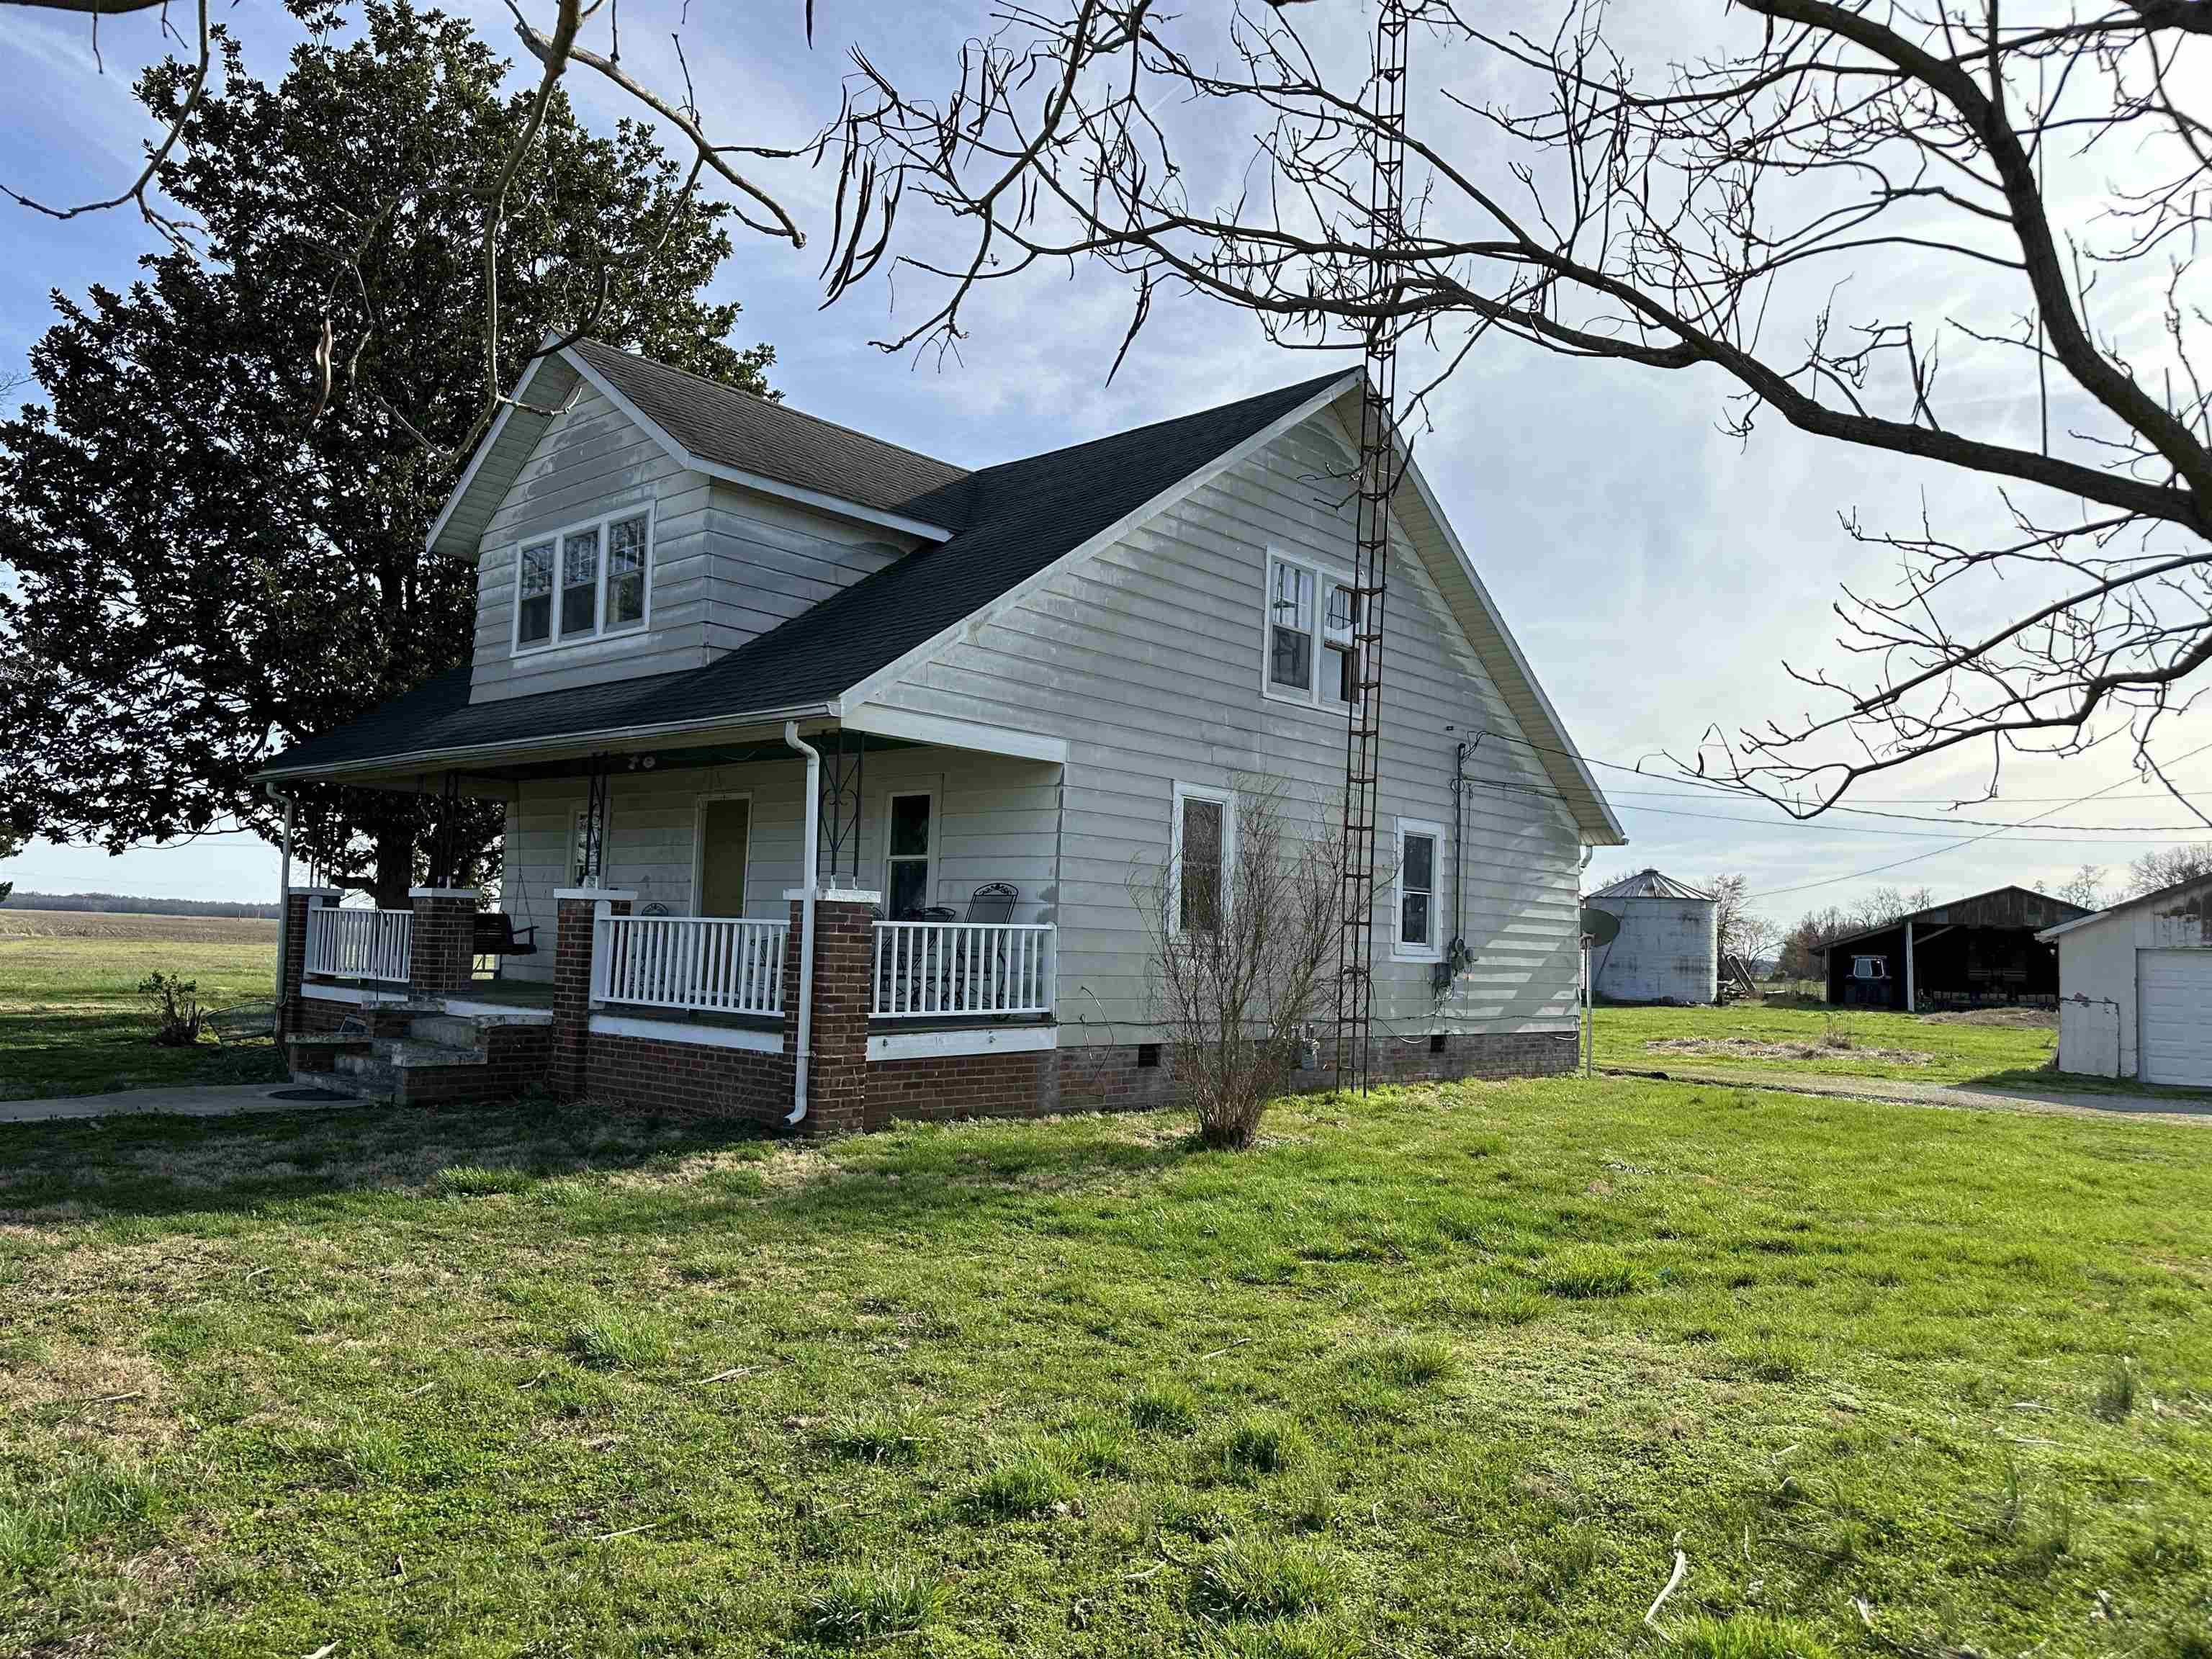 475 Hwy 81 S., Rumsey, Kentucky 42371, 2 Bedrooms Bedrooms, ,1 BathroomBathrooms,Single Family Residence,For Sale,Hwy 81 S.,89219